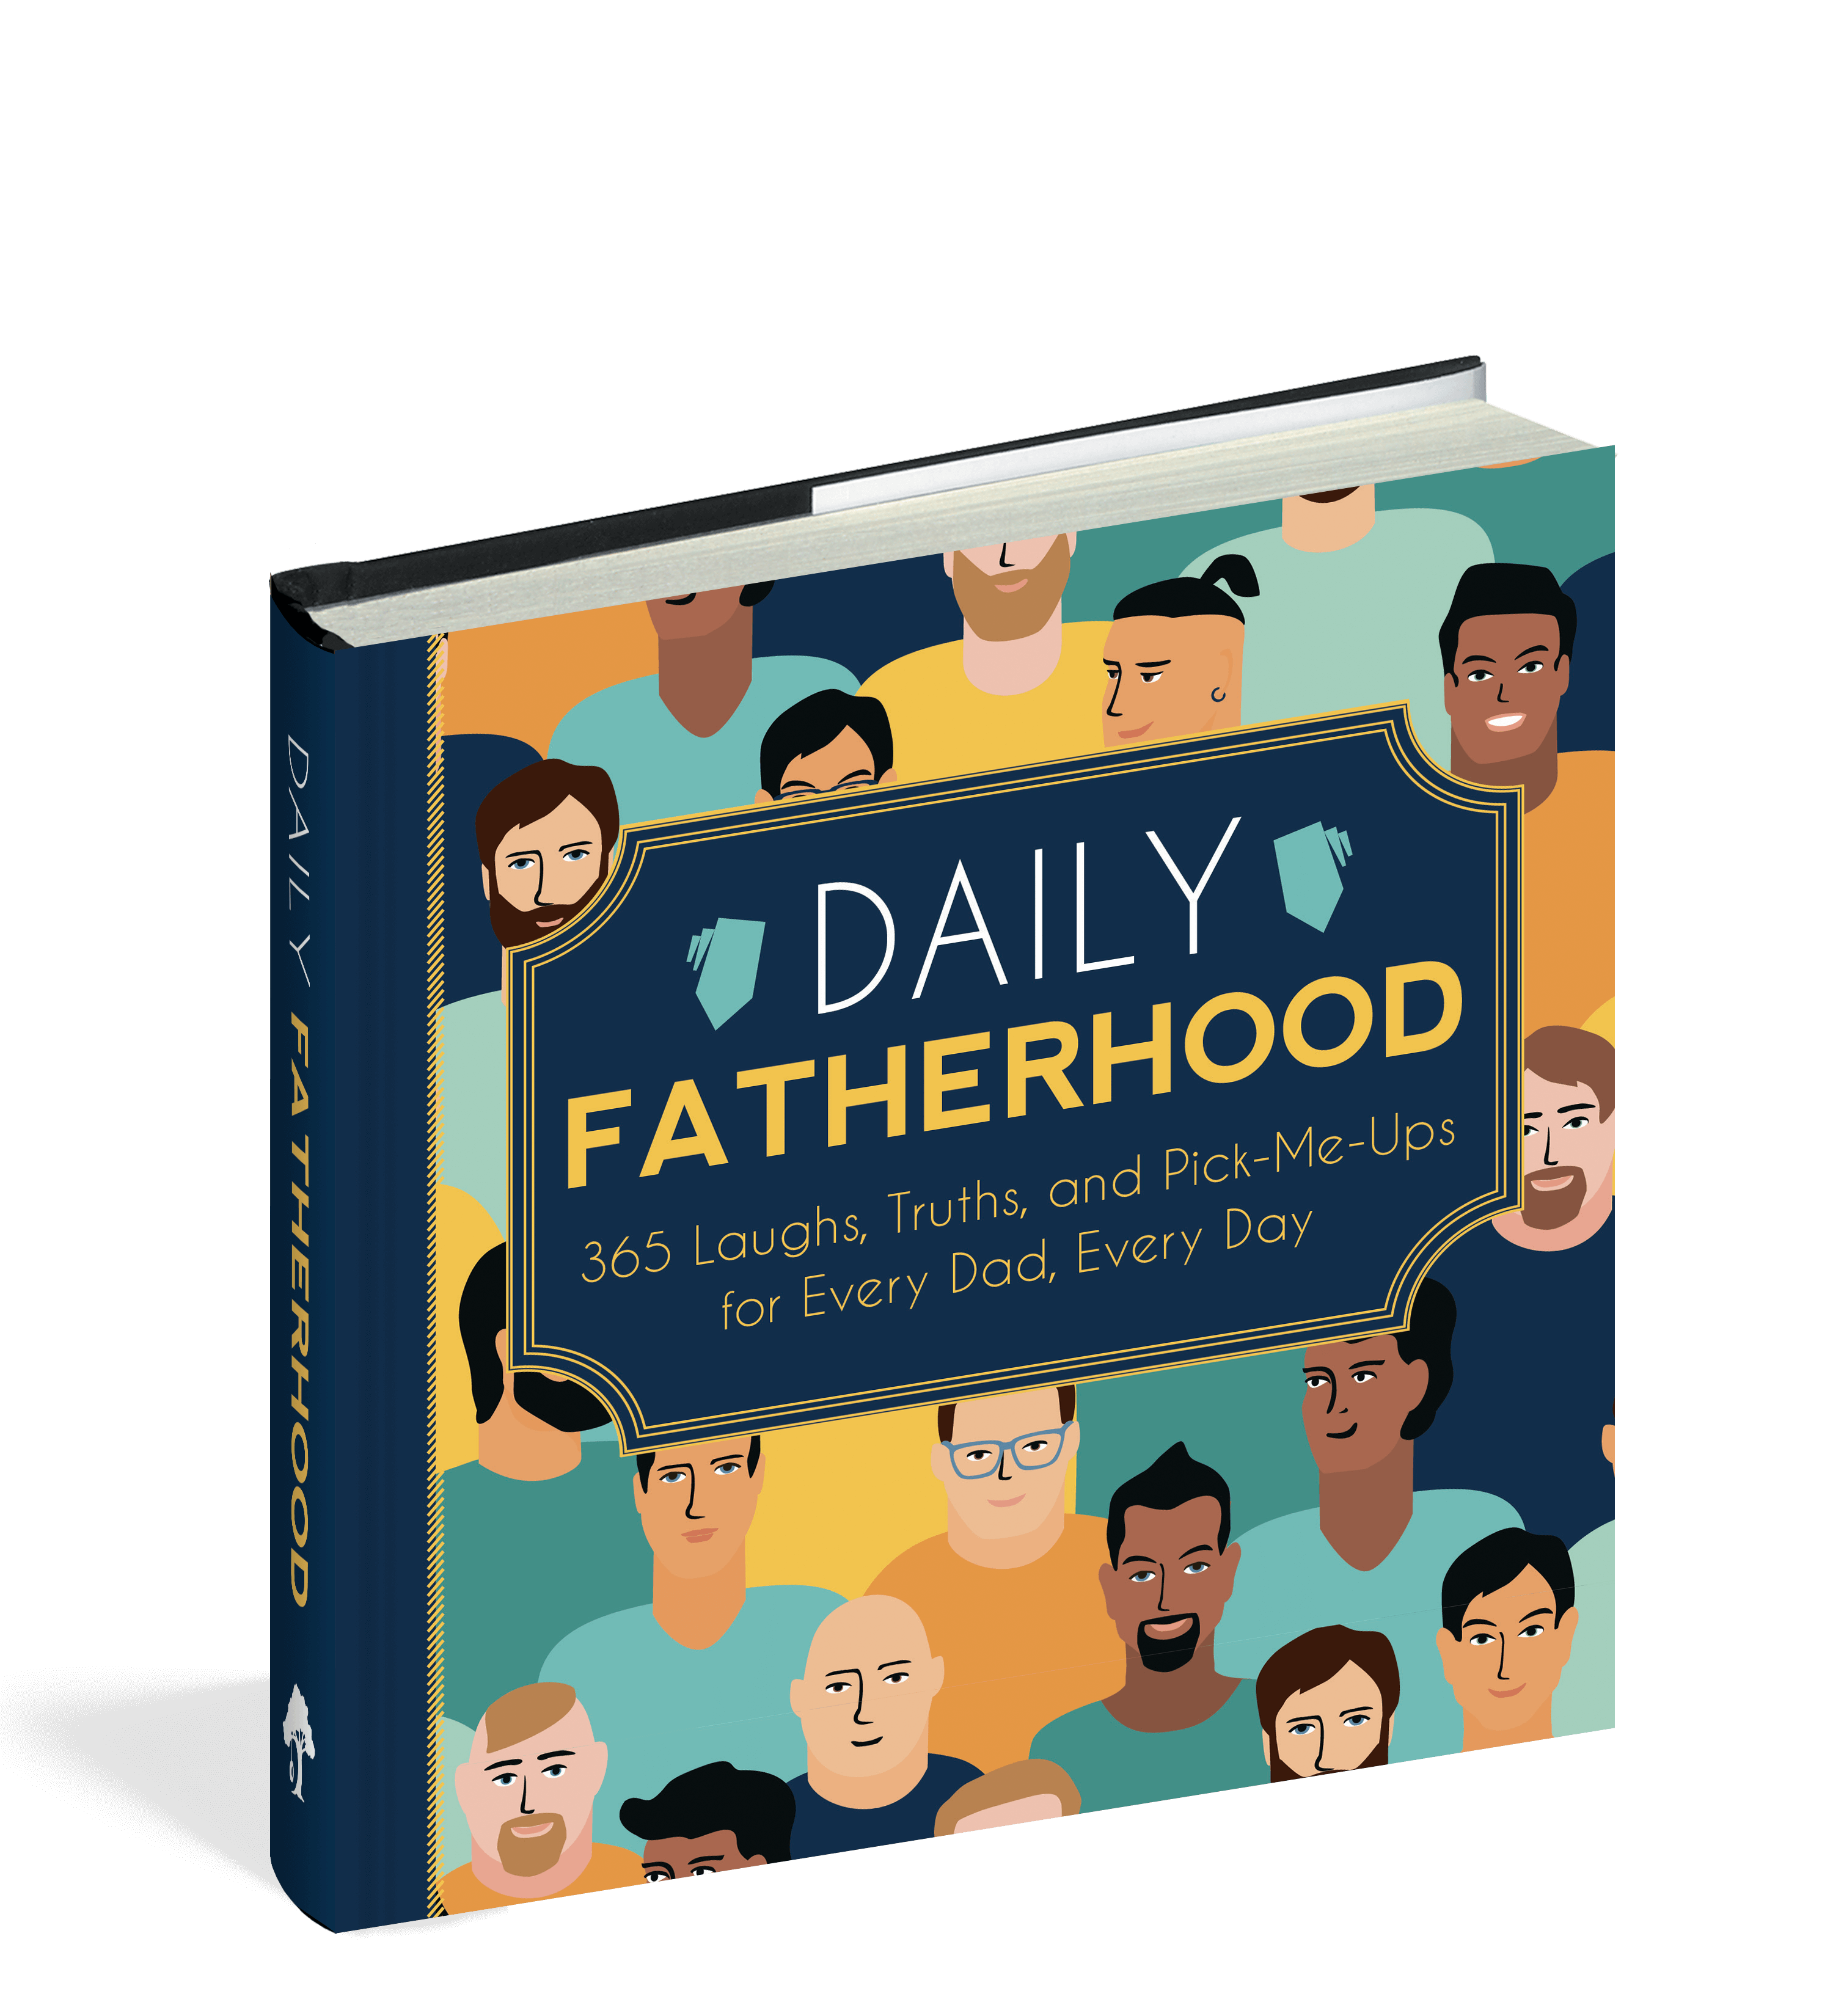 The cover of the book Daily Fatherhood.